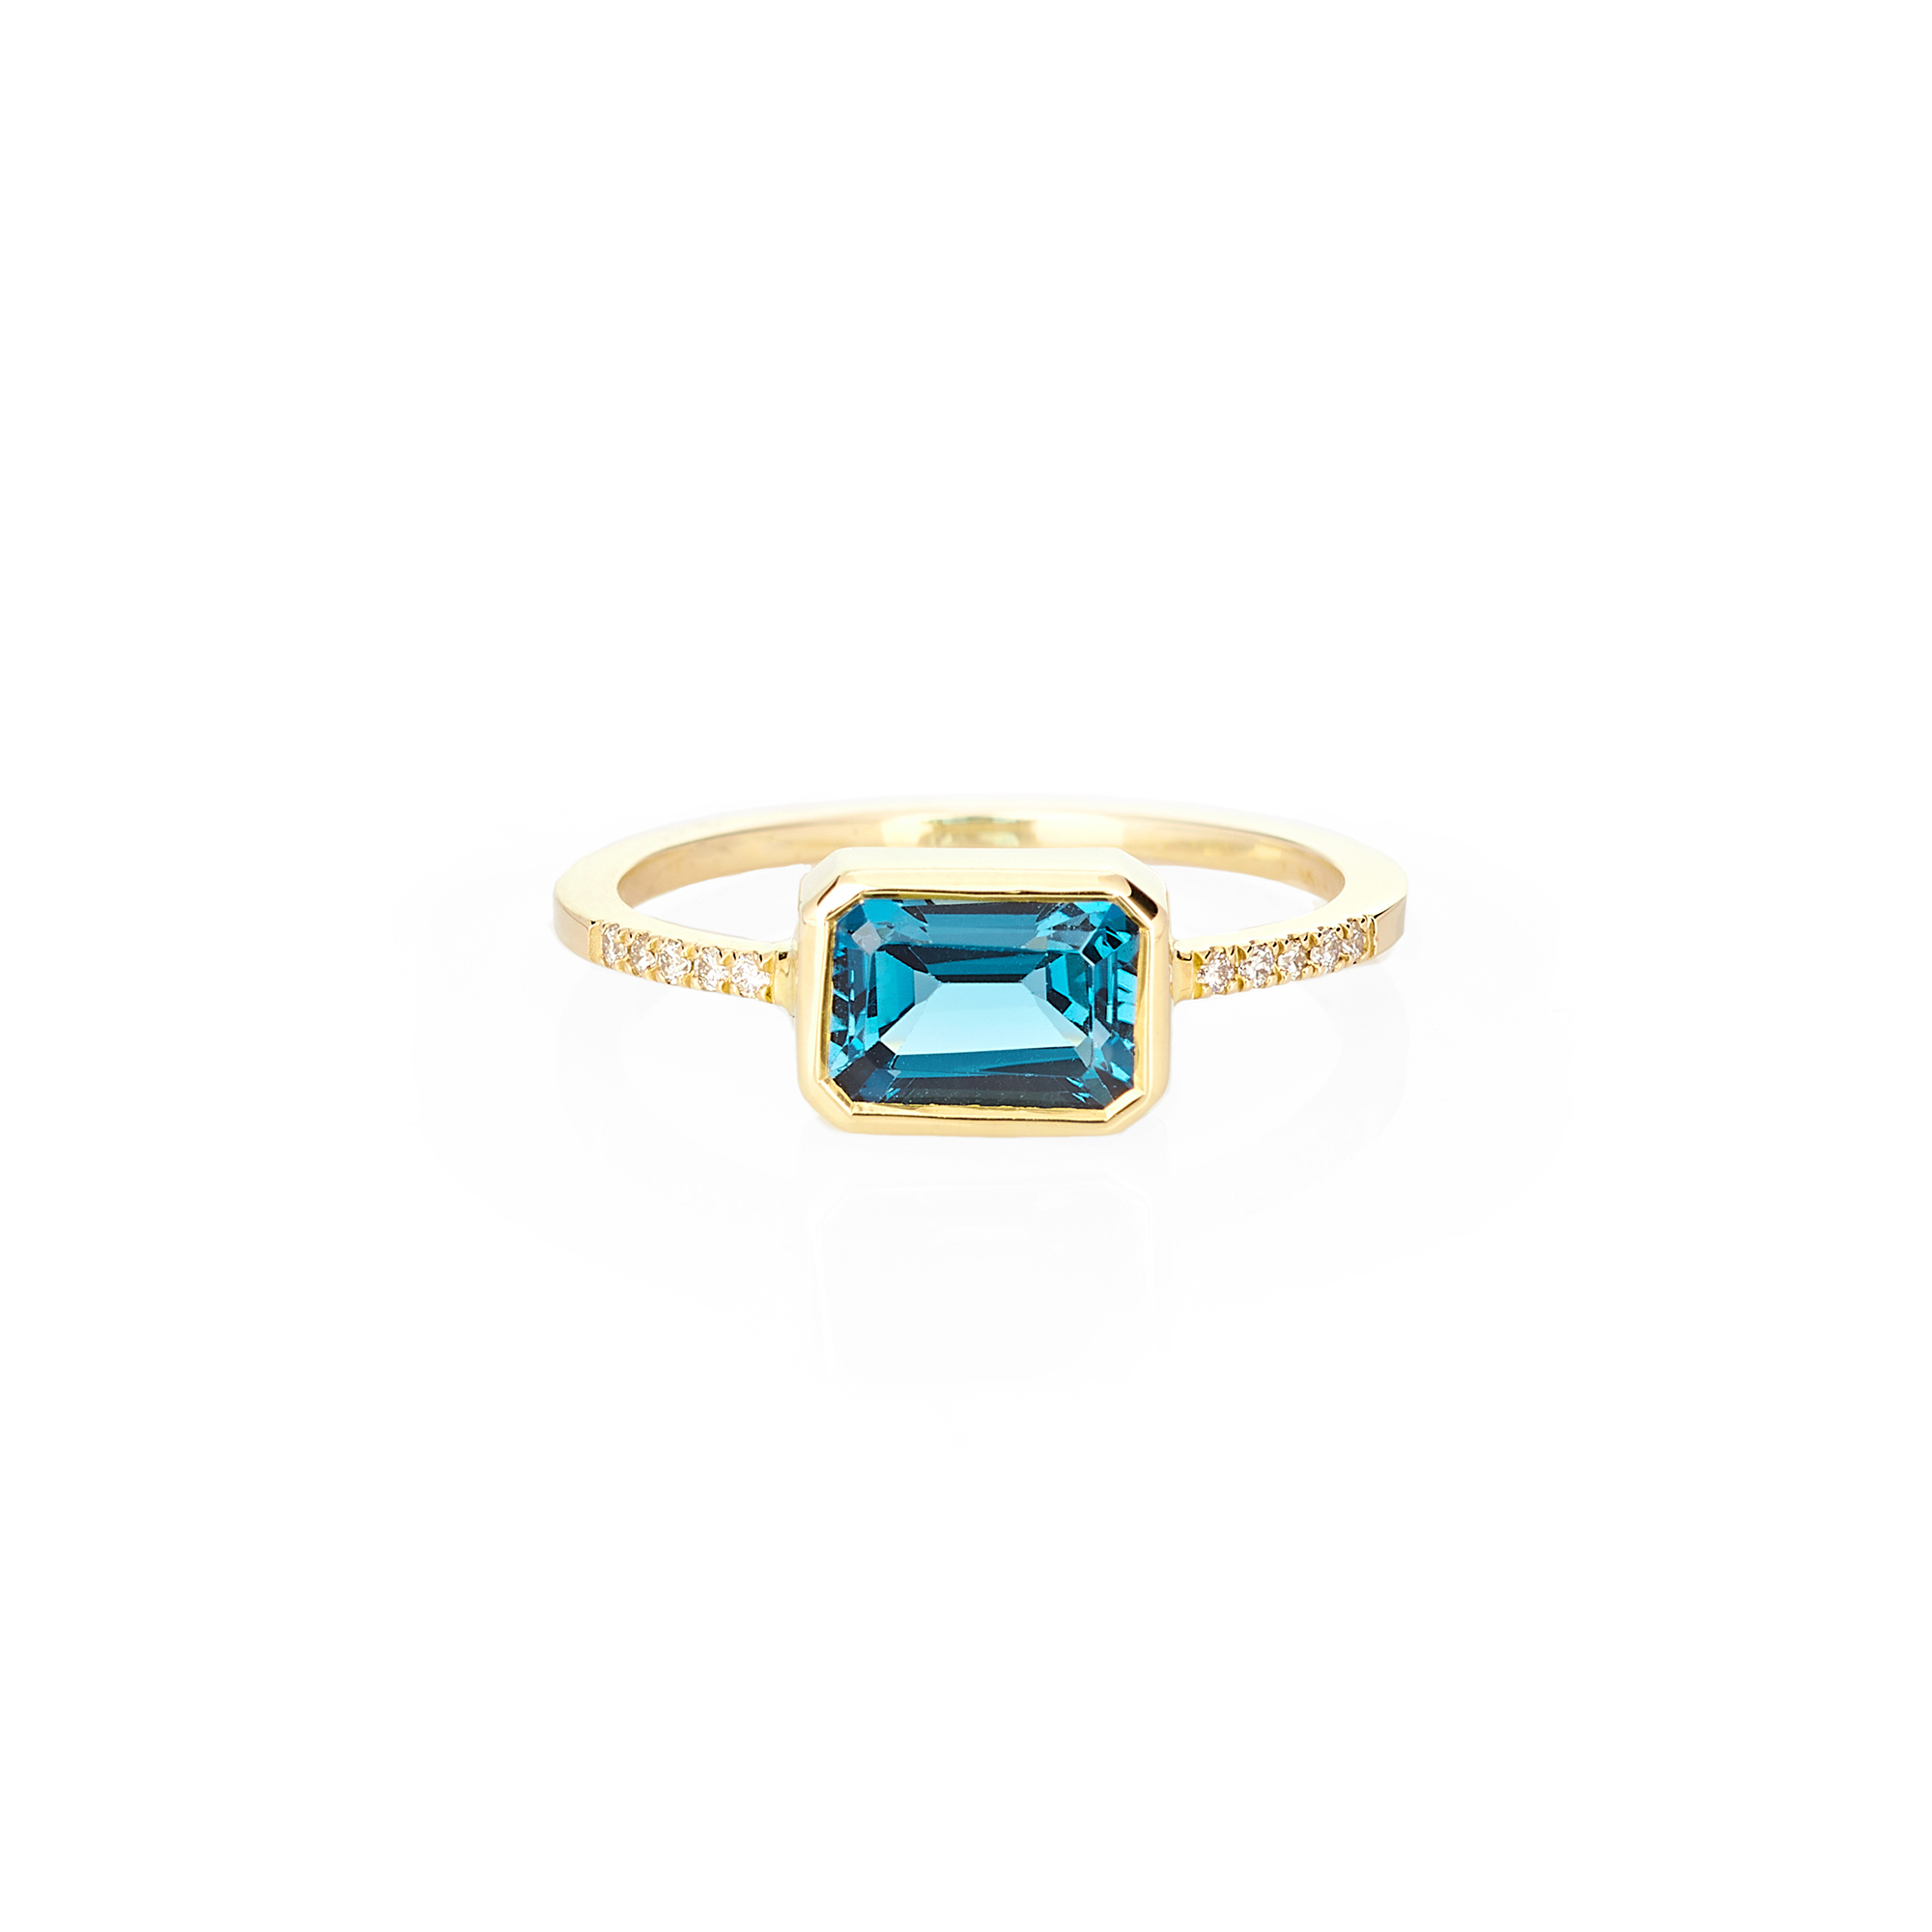 2.50ct Imperial Topaz & Diamond Ring in 18kt Gold | Burton's – Burton's  Gems and Opals